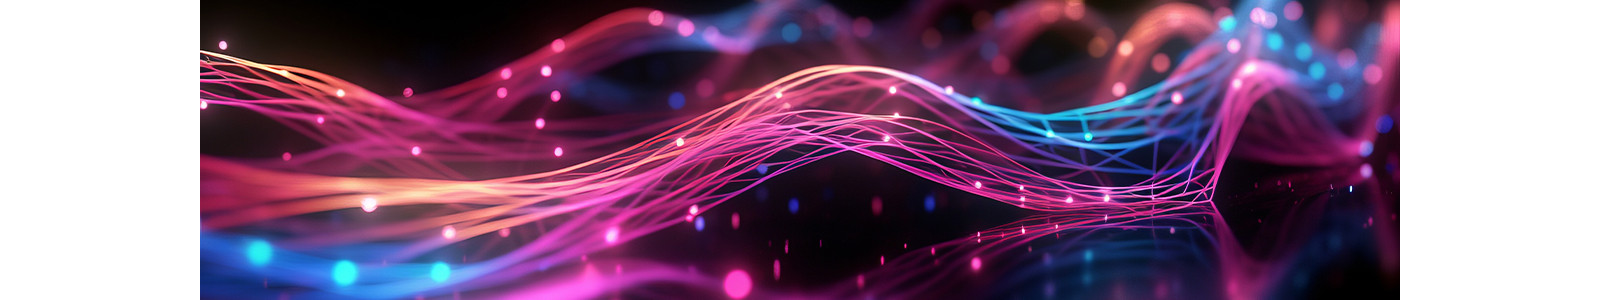 Abstract image of intertwining colorful neon lights and lines on a dark background.